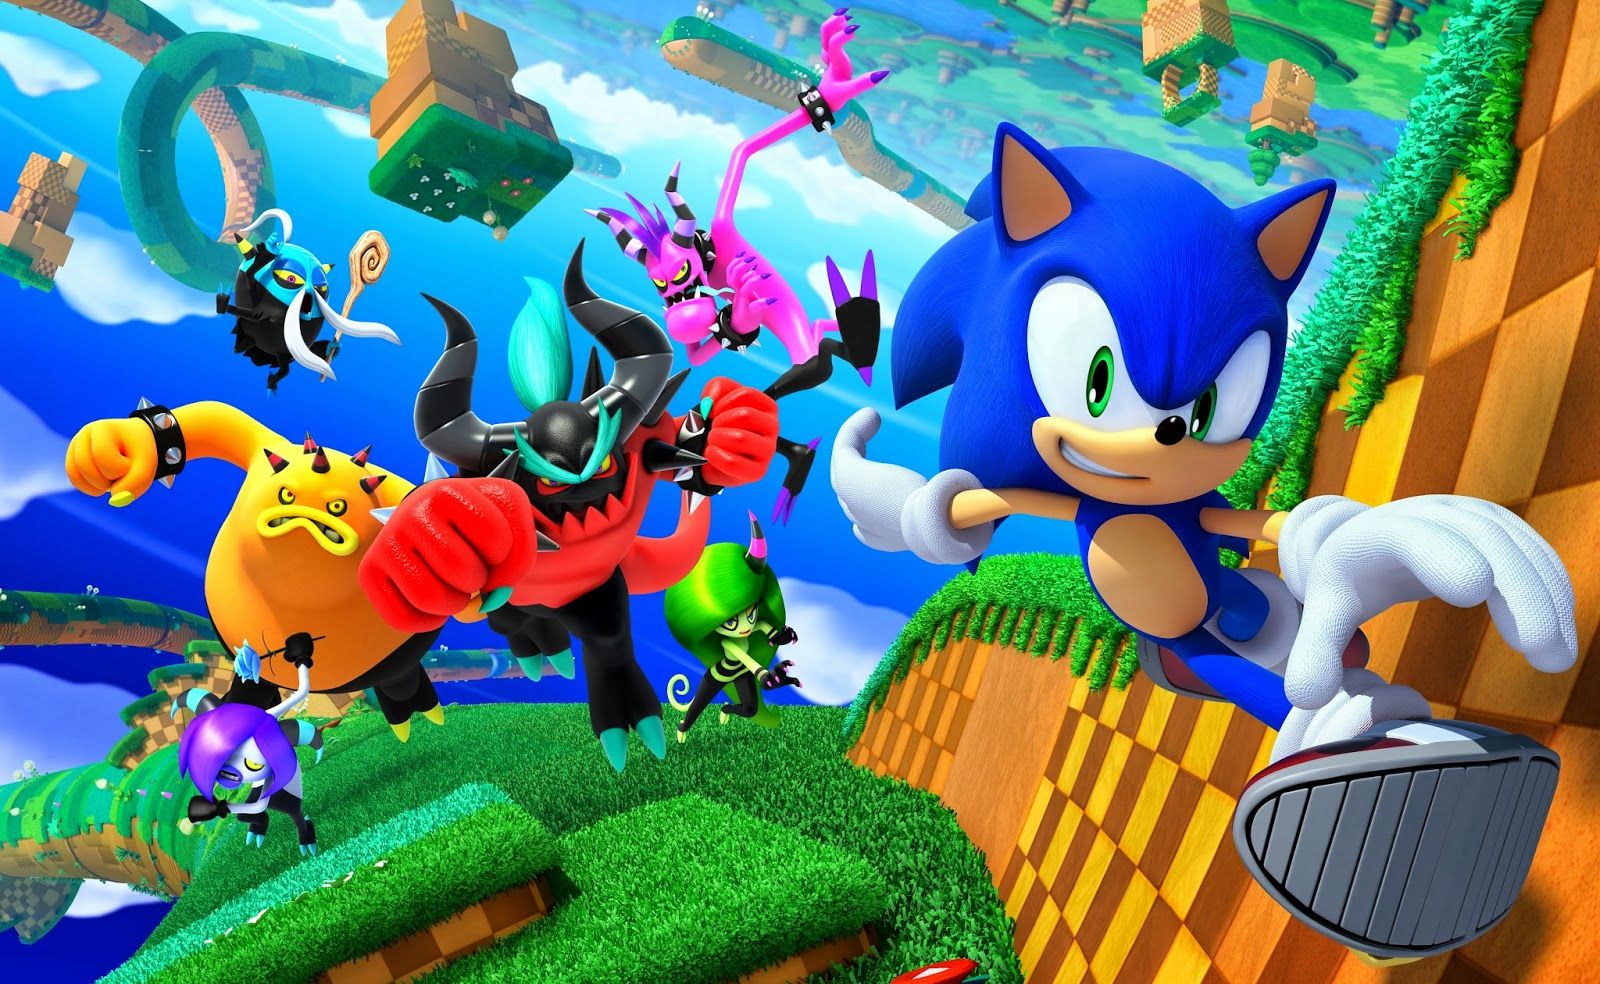 Sonic The Hedgehog Wallpapers 2015 - Wallpaper Cave